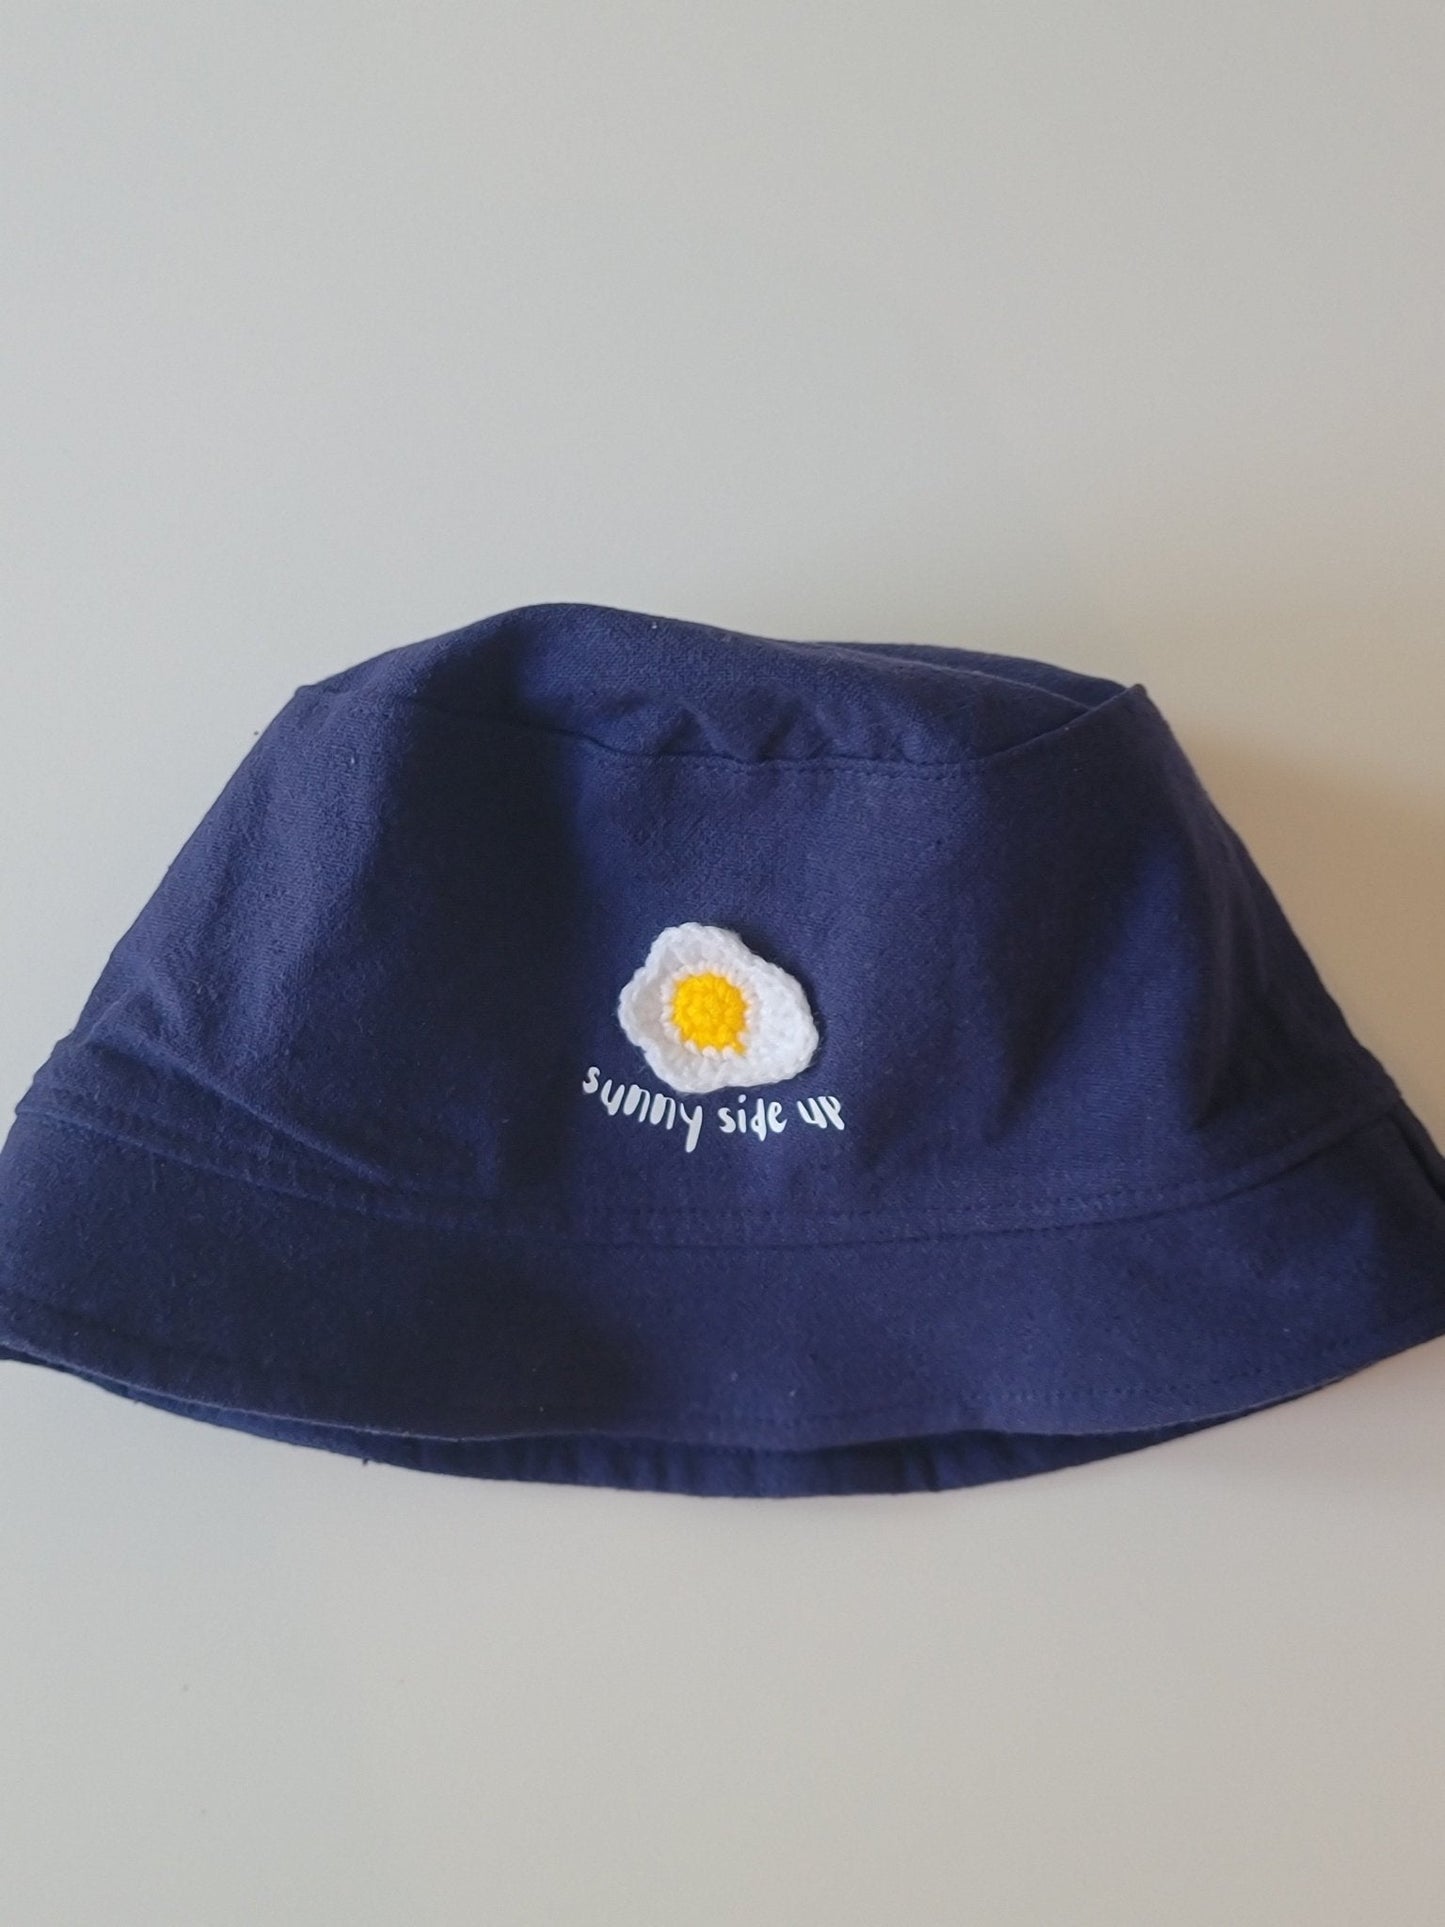 Bucket hat-Sunny side up-4